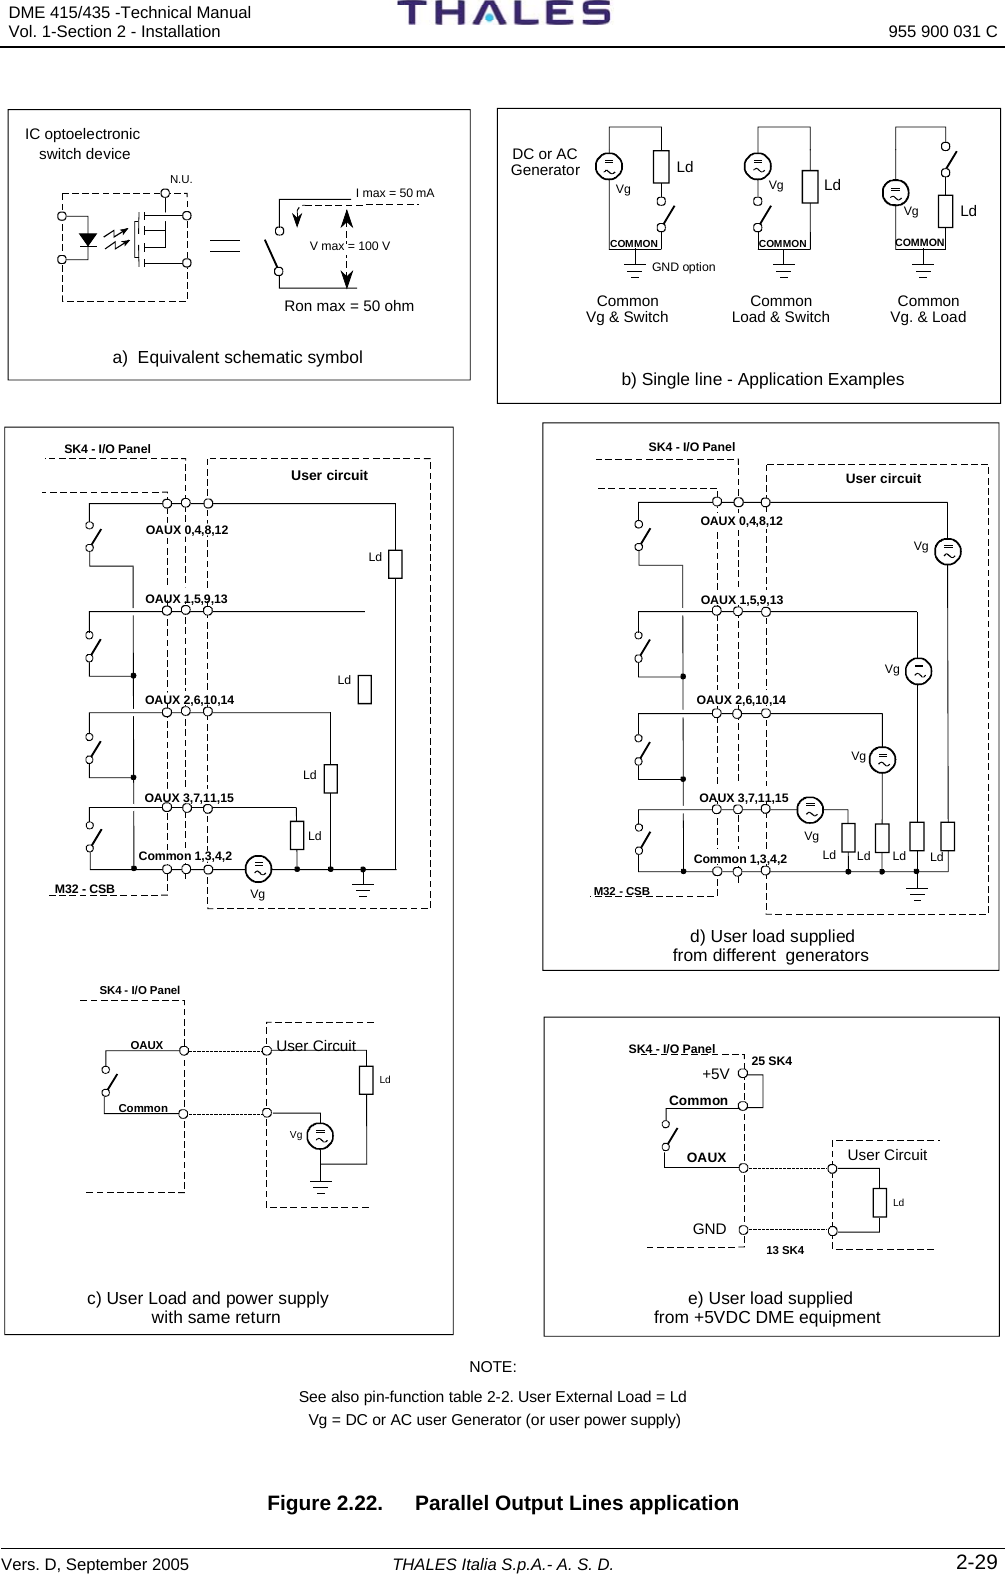 DME 415/435 -Technical Manual  Vol. 1-Section 2 - Installation  955 900 031 C Vers. D, September 2005 THALES Italia S.p.A.- A. S. D. 2-29  IC optoelectronic switch devicea)  Equivalent schematic symbolI max = 50 mAV max = 100 VGeneratorCOMMONGND optionDC or ACLdCOMMON COMMONCommon Vg &amp; Switch Common Load &amp; Switch Common  Vg. &amp; Loadb) Single line - Application ExamplesN.U.M32 - CSBSK4 - I/O PanelM32 - CSBSK4 - I/O PanelLdc) User Load and power supply with same return d) User load supplied from different  generatorsNOTE:          See also pin-function table 2-2. User External Load = Ld Vg = DC or AC user Generator (or user power supply)VgVgVgVgVgLdLdLdLd Ld Ld LdLdLdVg VgVgRon max = 50 ohmLdCommon OAUX User Circuit25 SK4+5VGND13 SK4LdCommon OAUX User Circuit SK4 - I/O PanelVgUser circuite) User load supplied from +5VDC DME equipmentCommon 1,3,4,2OAUX 0,4,8,12OAUX 1,5,9,13OAUX 2,6,10,14OAUX 3,7,11,15User circuitOAUX 0,4,8,12OAUX 3,7,11,15Common 1,3,4,2OAUX 2,6,10,14OAUX 1,5,9,13SK4 - I/O Panel  Figure 2.22.   Parallel Output Lines application 